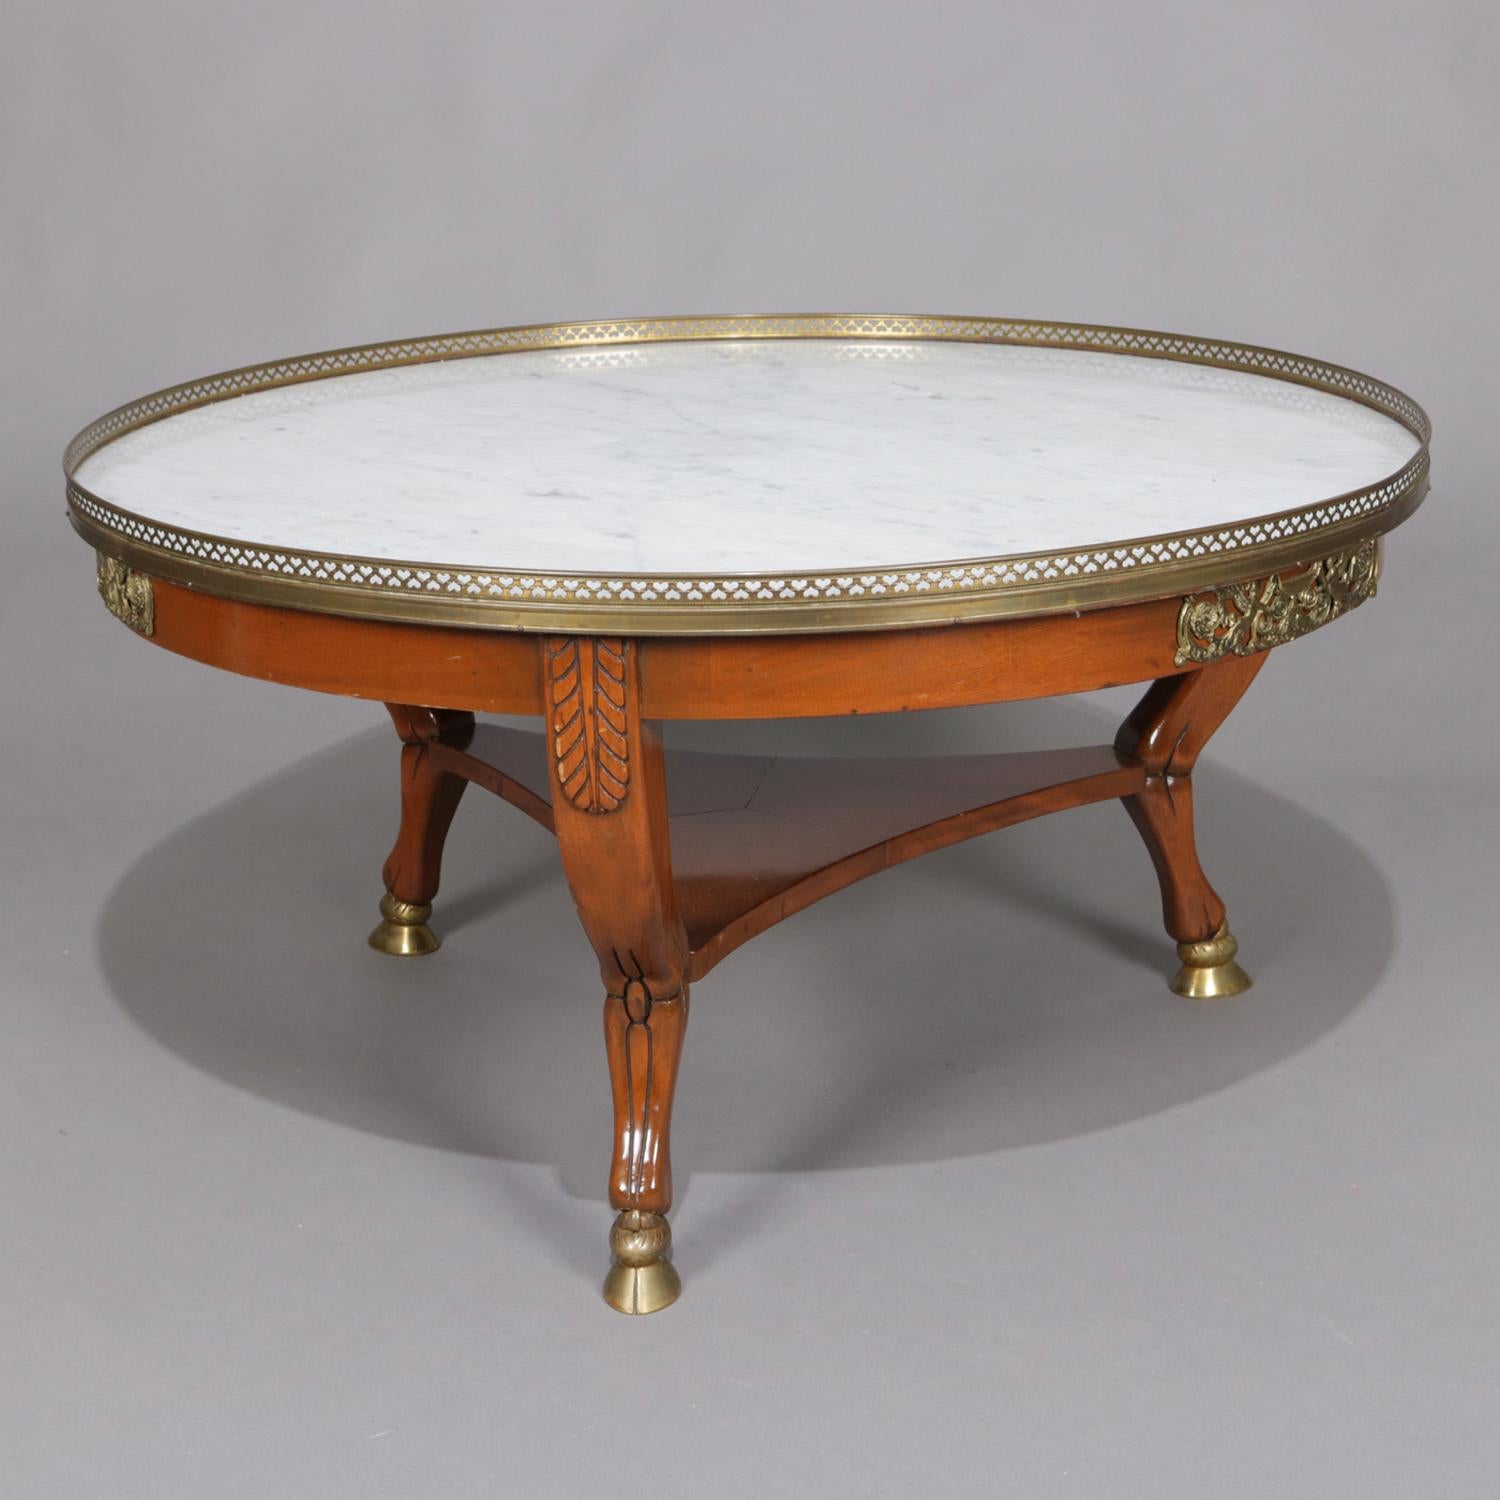 20th Century French Neoclassical Carved Mahogany, Ormolu and Marble Coffee Table, circa 1930